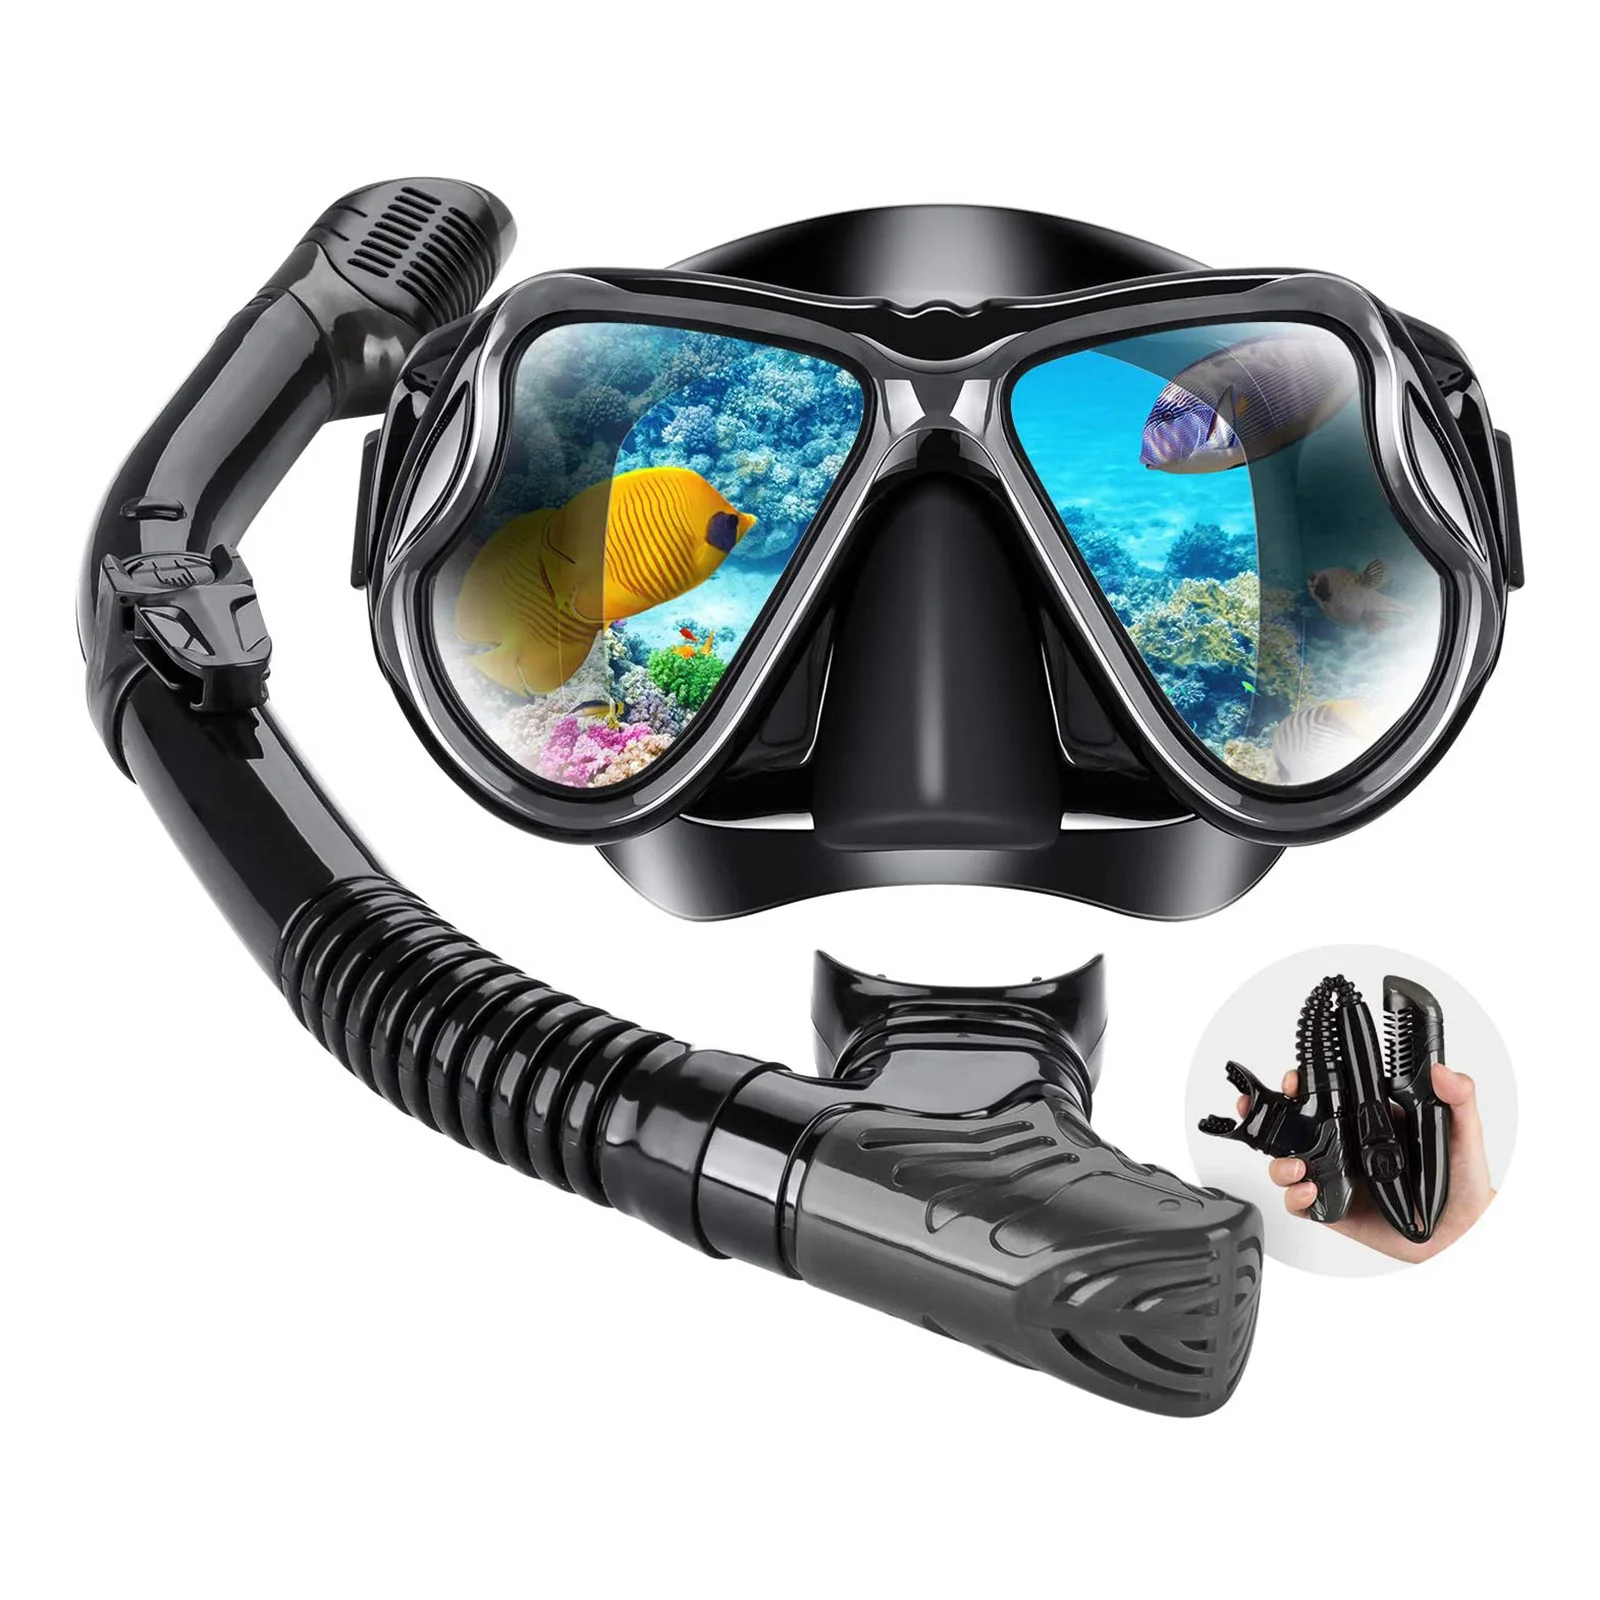 Dry Snorkel Gear Snorkeling Diving Equipment Anti-Fog Dive Mask Snorkel Goggles Scuba Diving Freediving Spearfishing Swimming